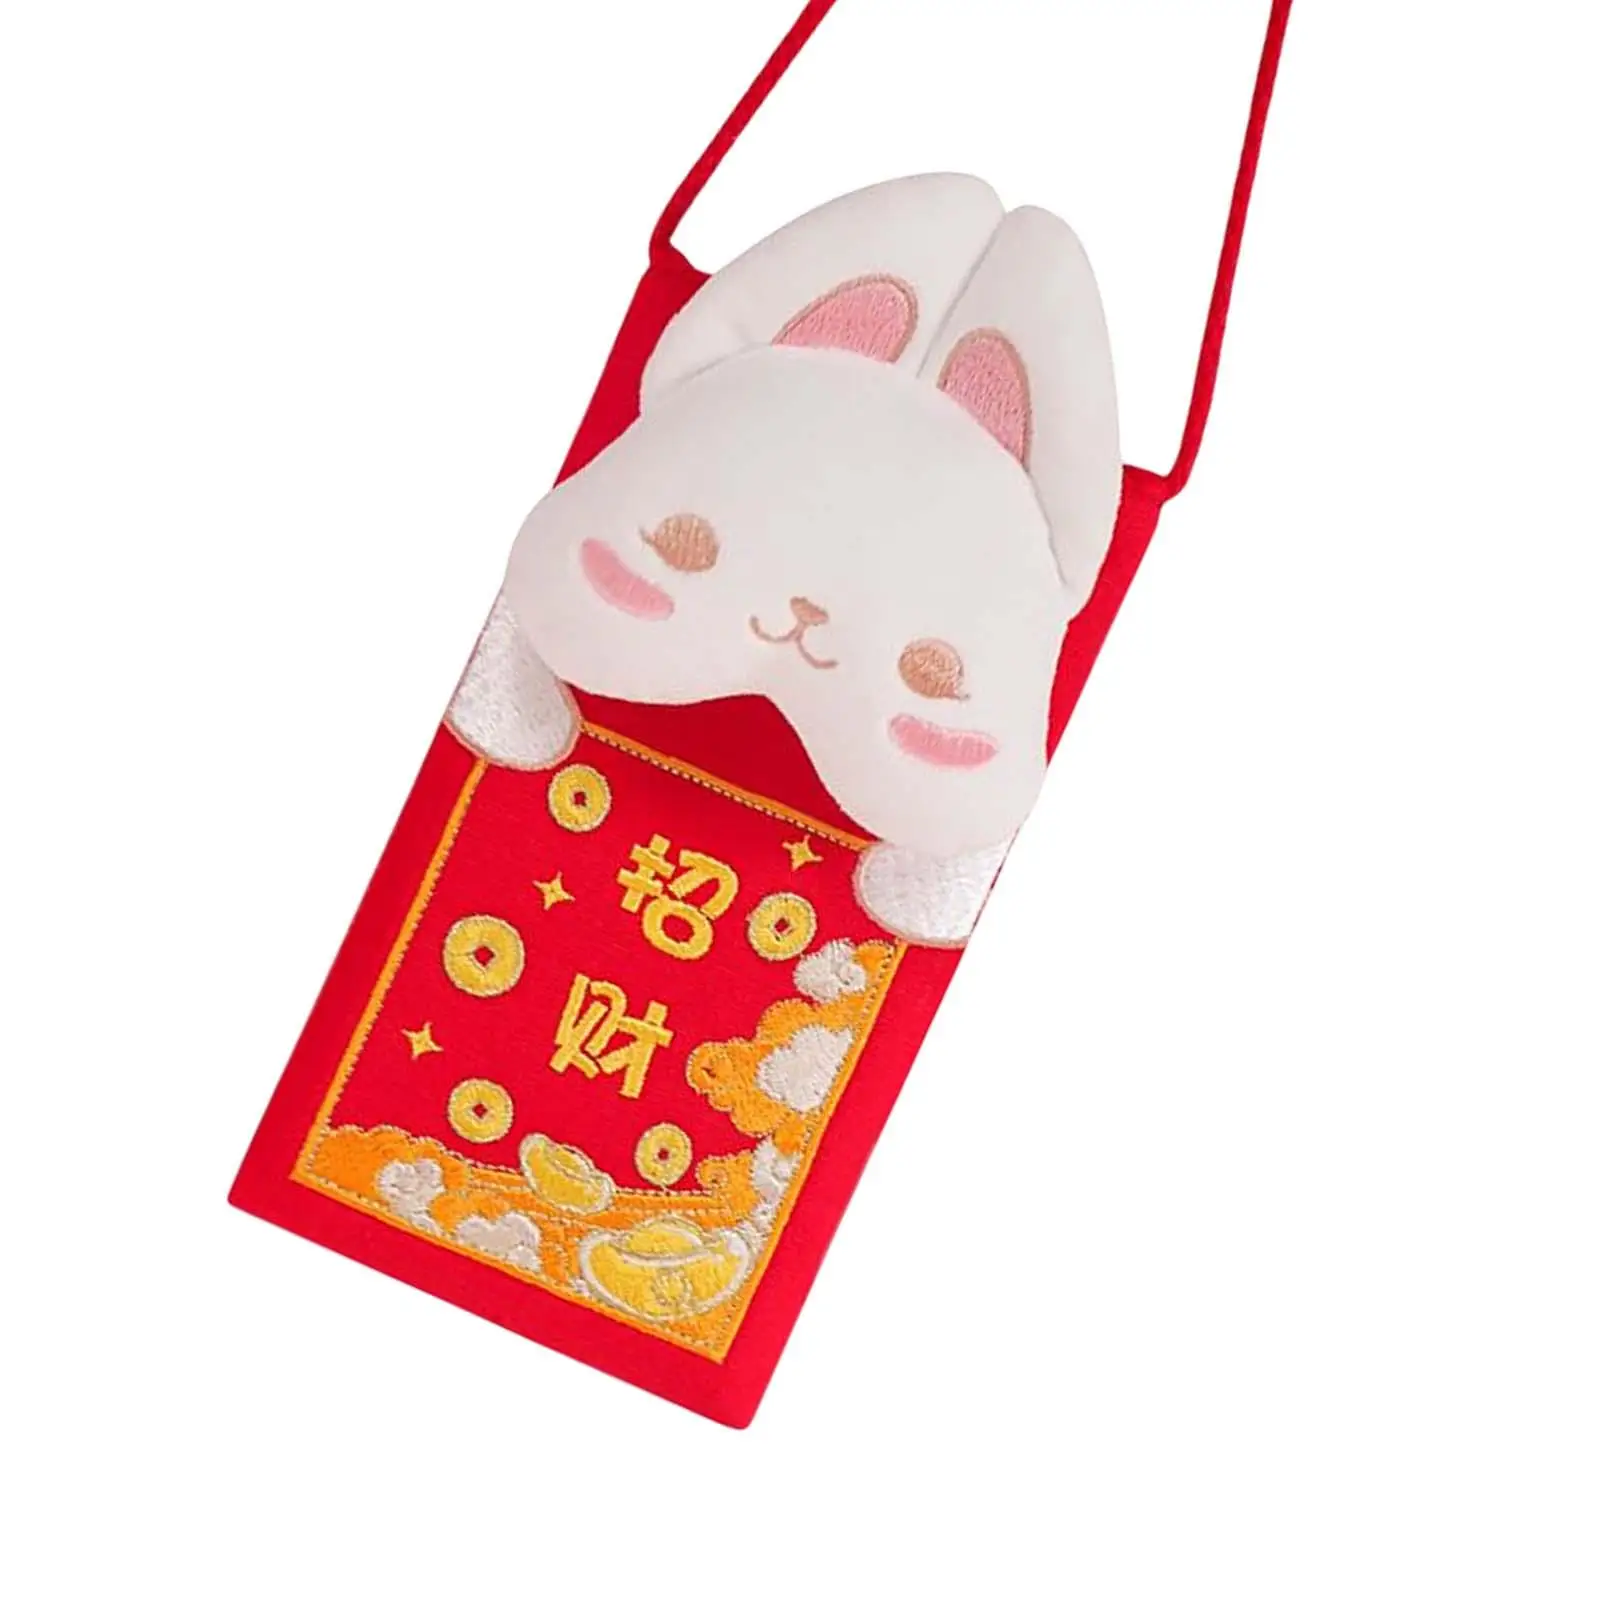 Chinese New Year Red Envelope Shoulder Bag Rabbit Purse Hong Bao Bunny Red Pocket for Party Wedding Birthday Decor